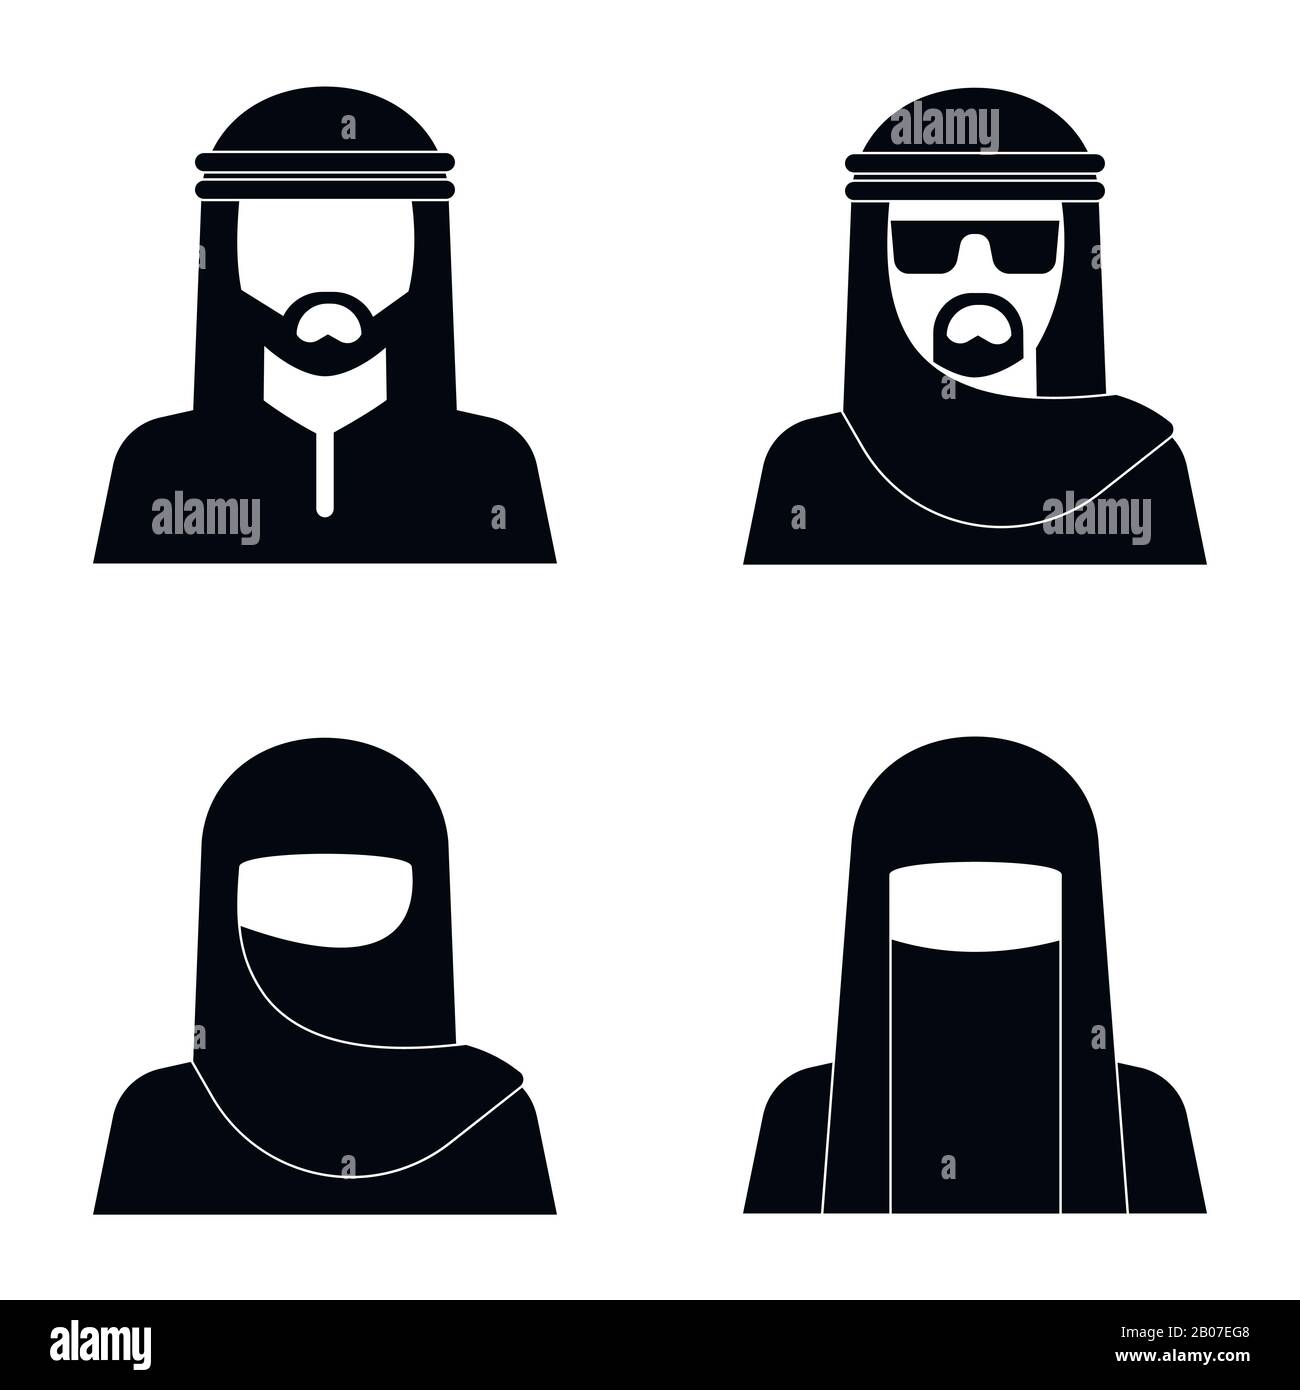 Middle Eastern people avatar in monochrome style design. Vector illustration Stock Vector